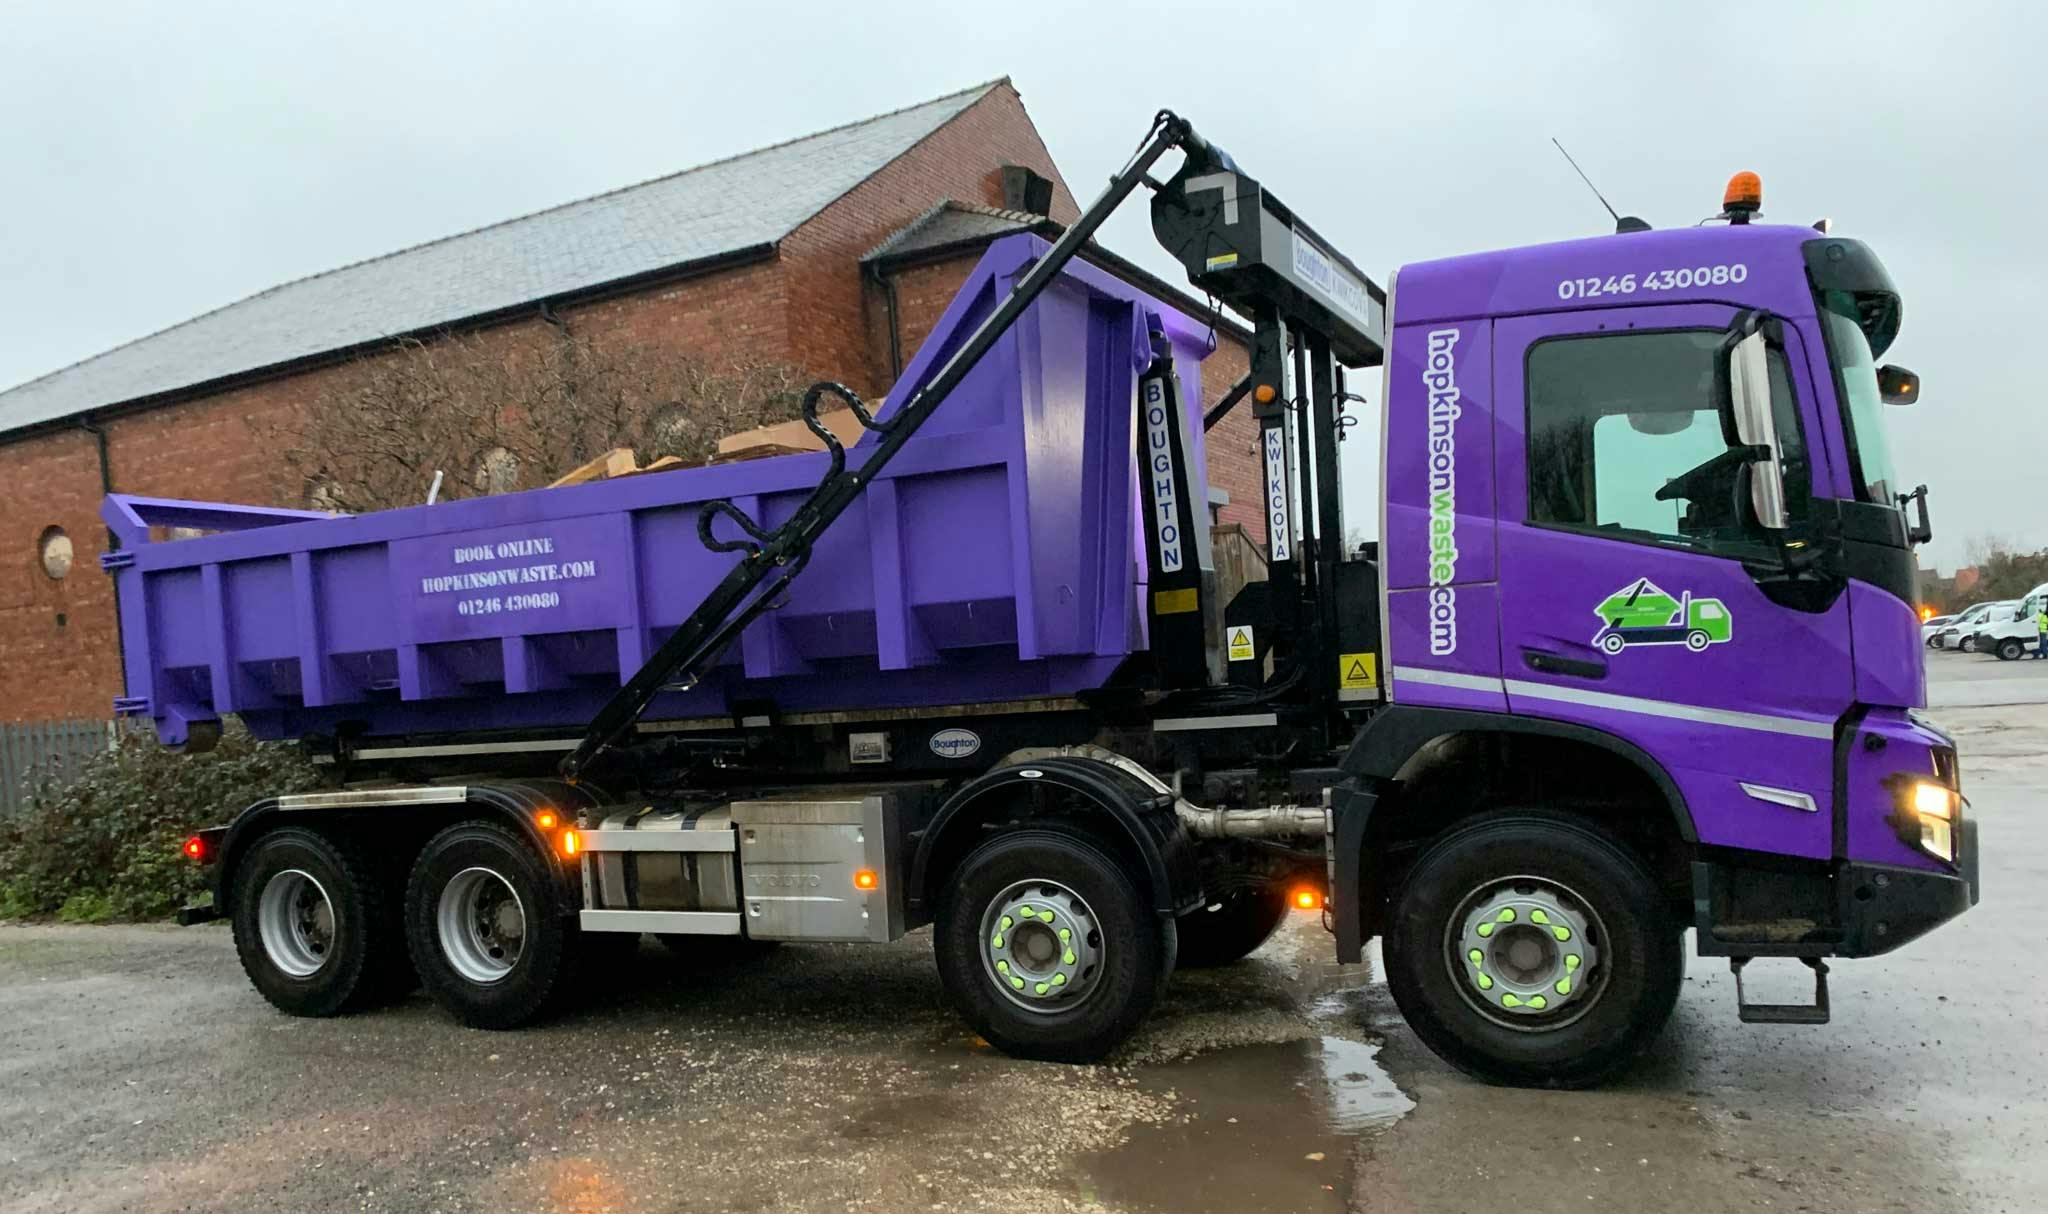 Roll on roll off skip hire services Chesterfield